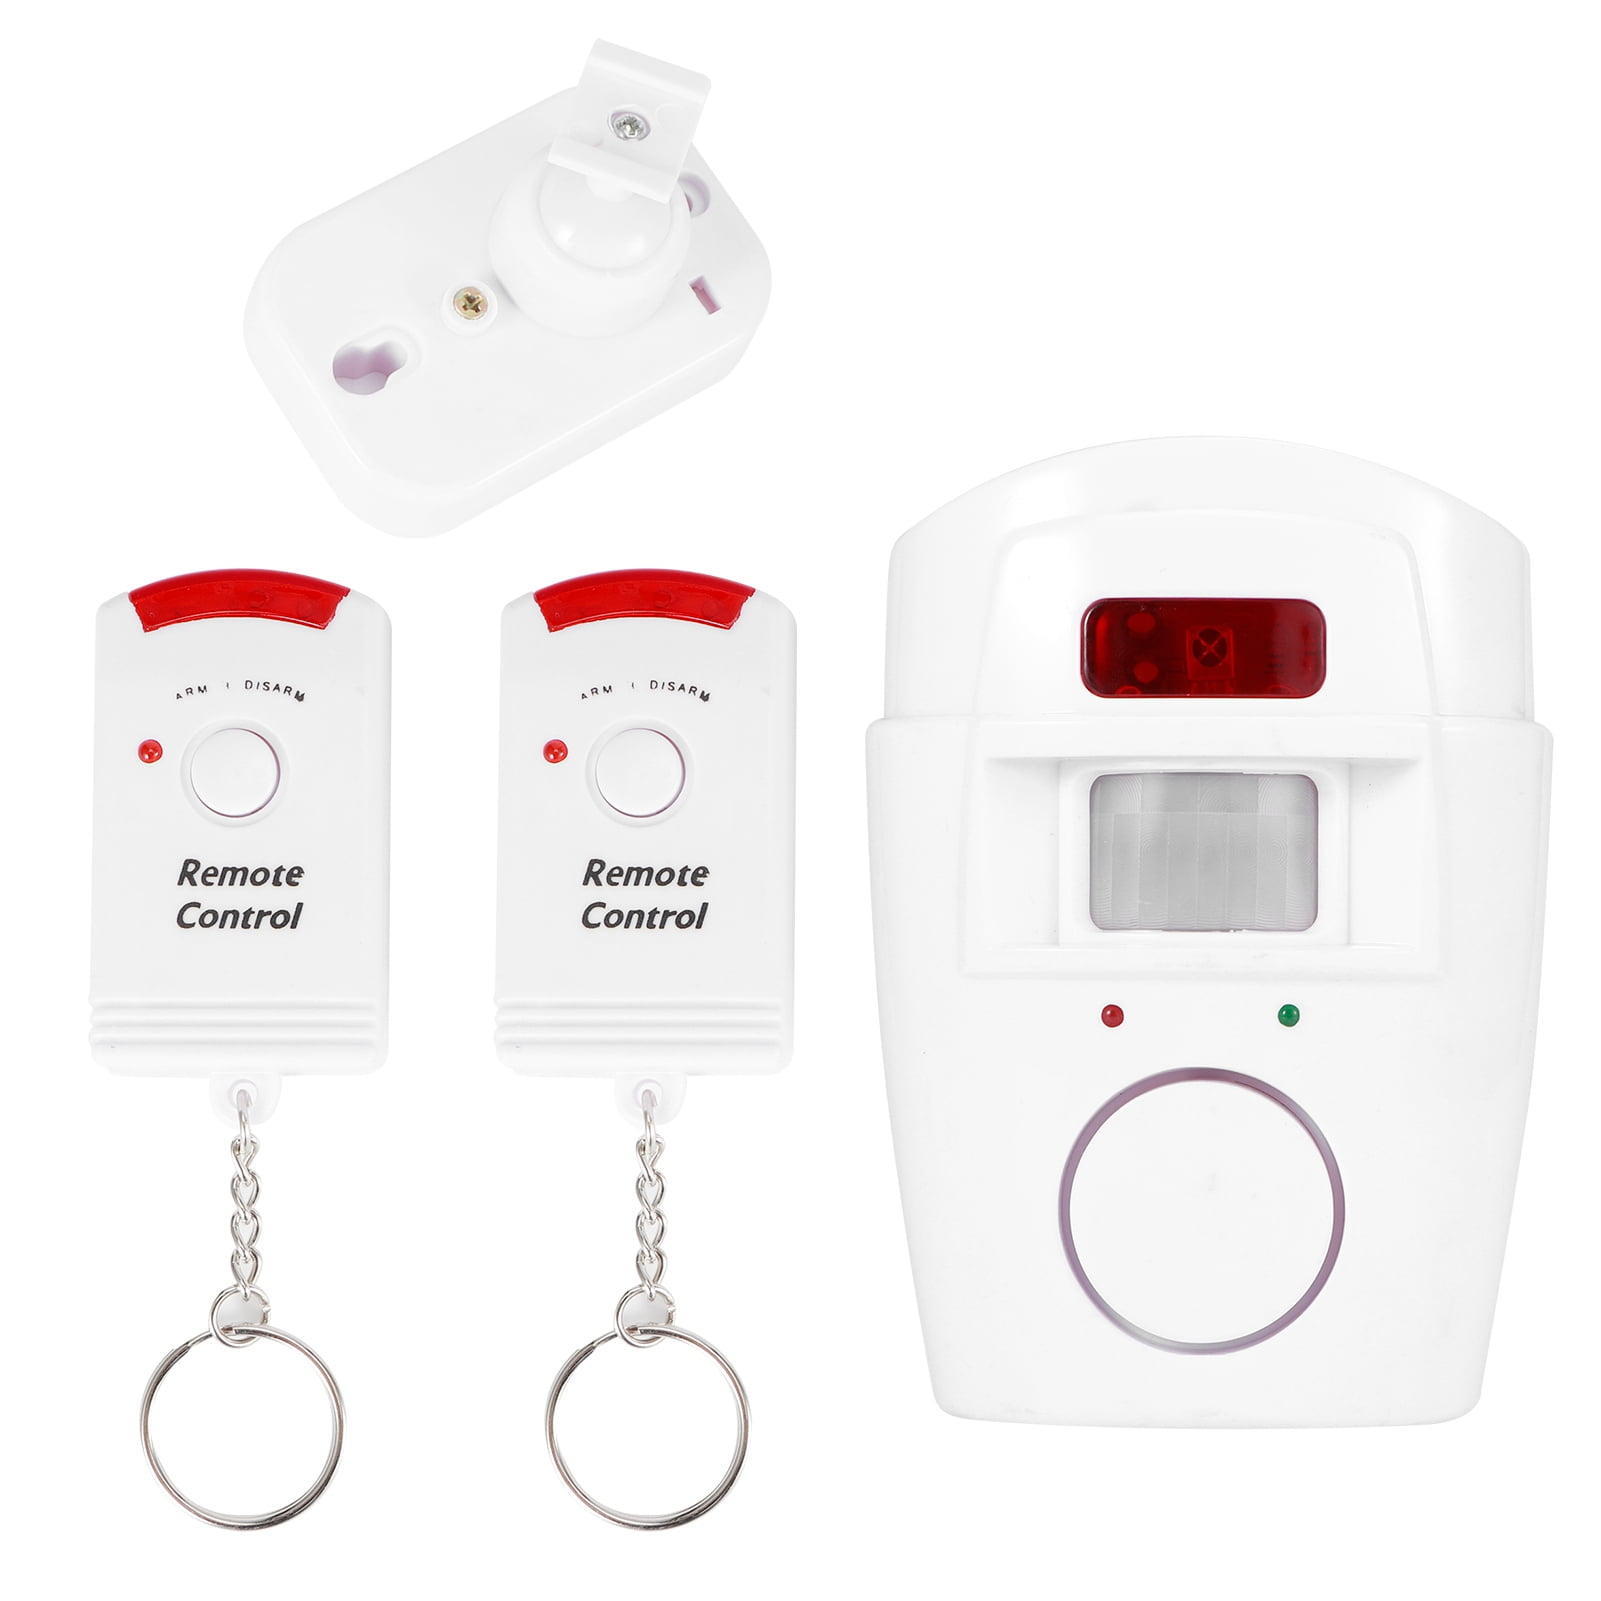 Affordable Easy to Install DIY Skylink SC-100W Wireless Deluxe Home & Office Burglar Alarm System Alert Security Package